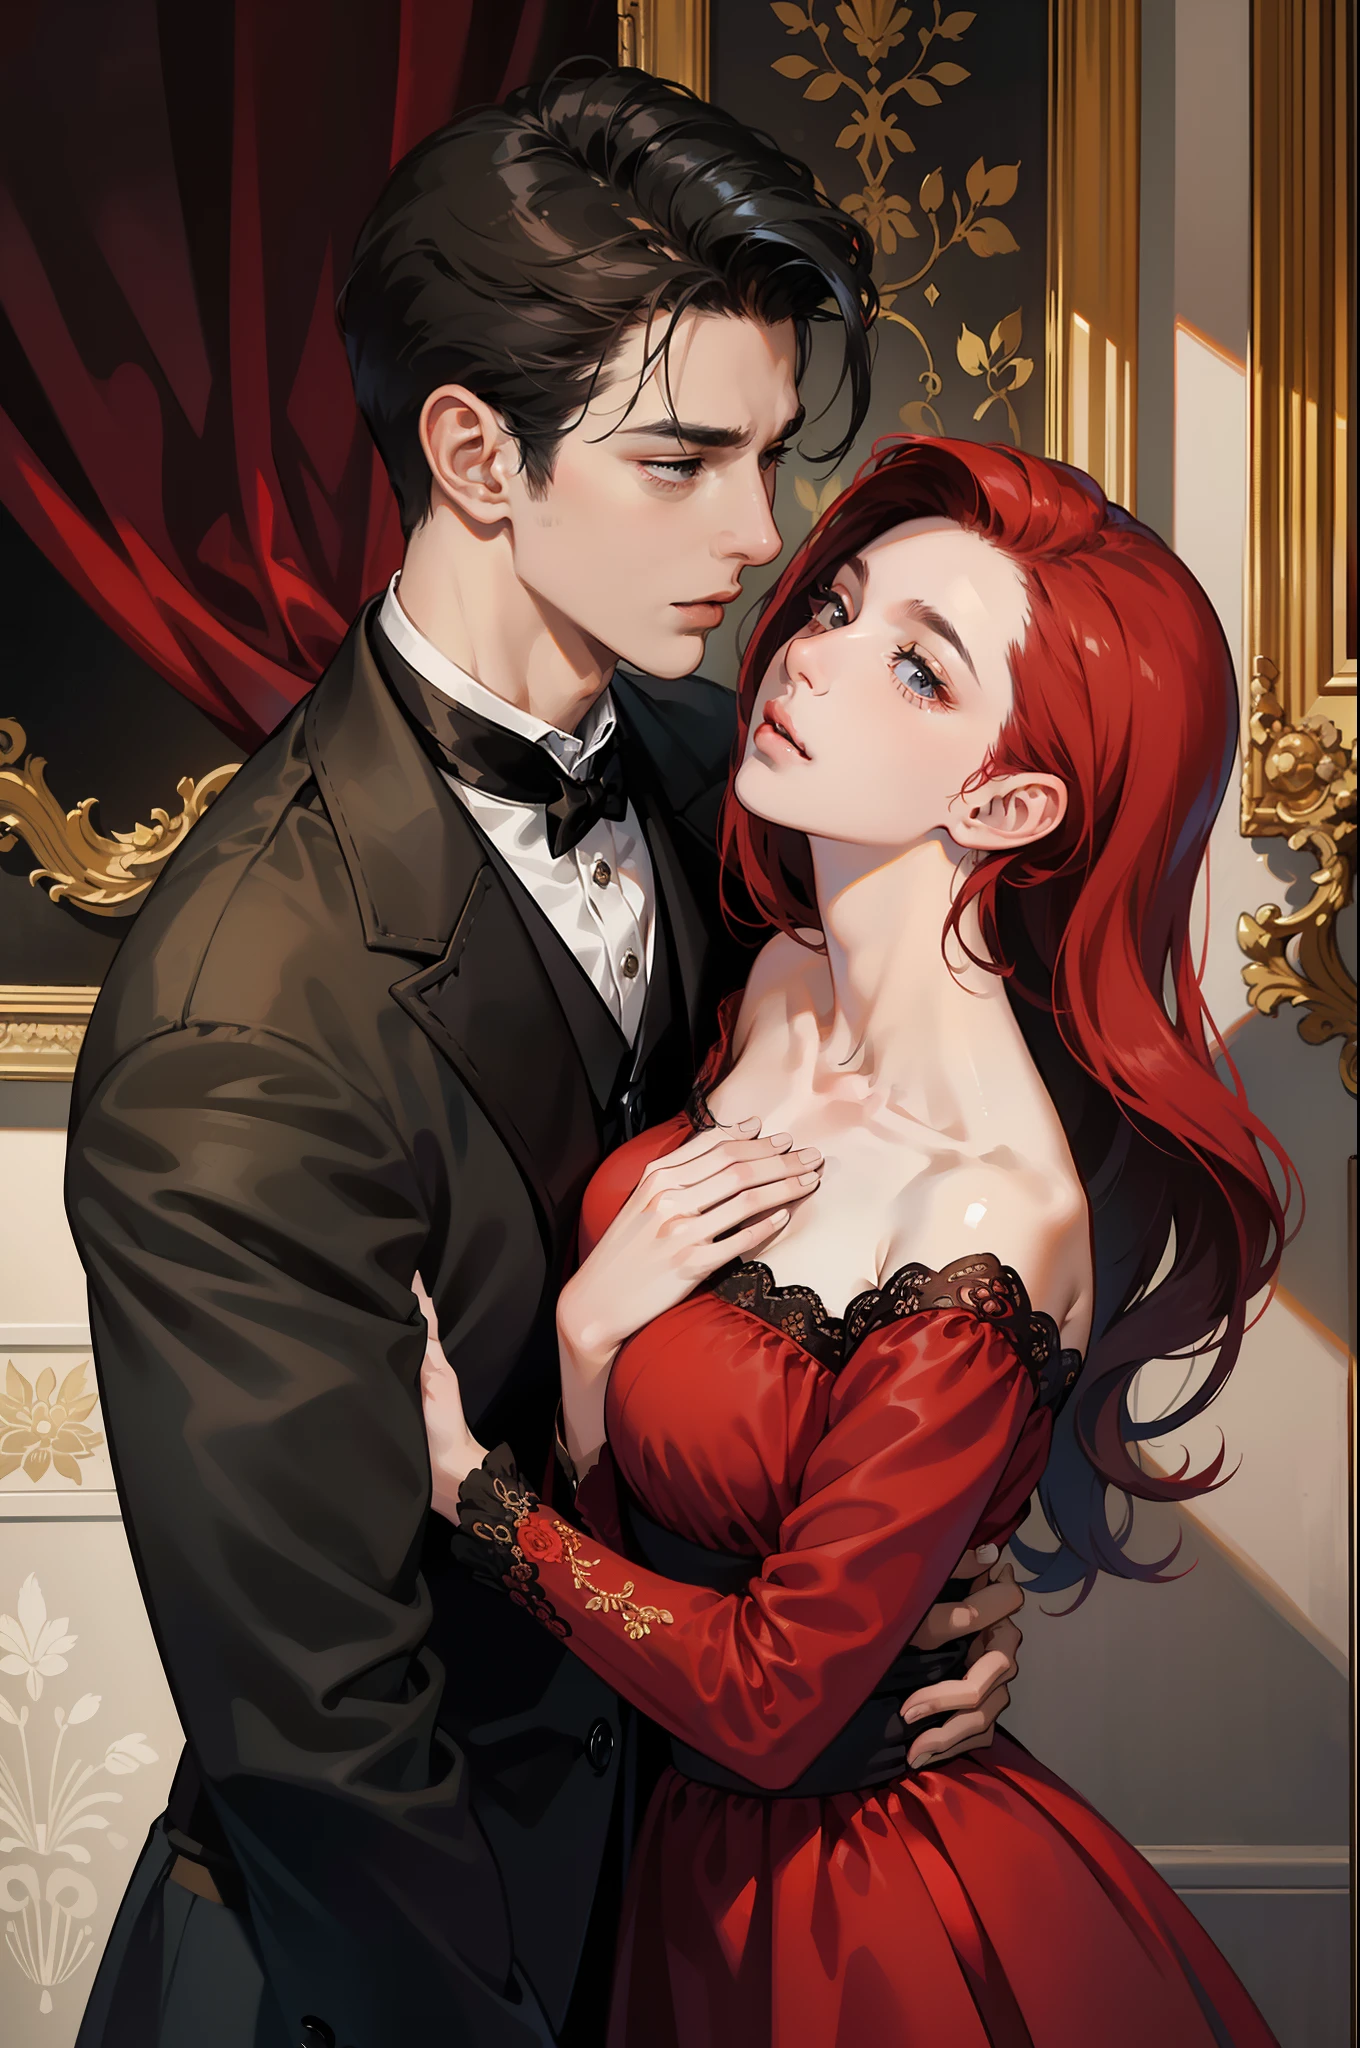 ((Masterpieces)), Best Quality, outstanding illustration, a couple kissing, soft focus, 1 boy with short black hair, 1 girl from (((Red hair))) long curly, victorian clothing, victorian romanticism, opulent and exquisite atmosphere, Soft light and warm lighting.